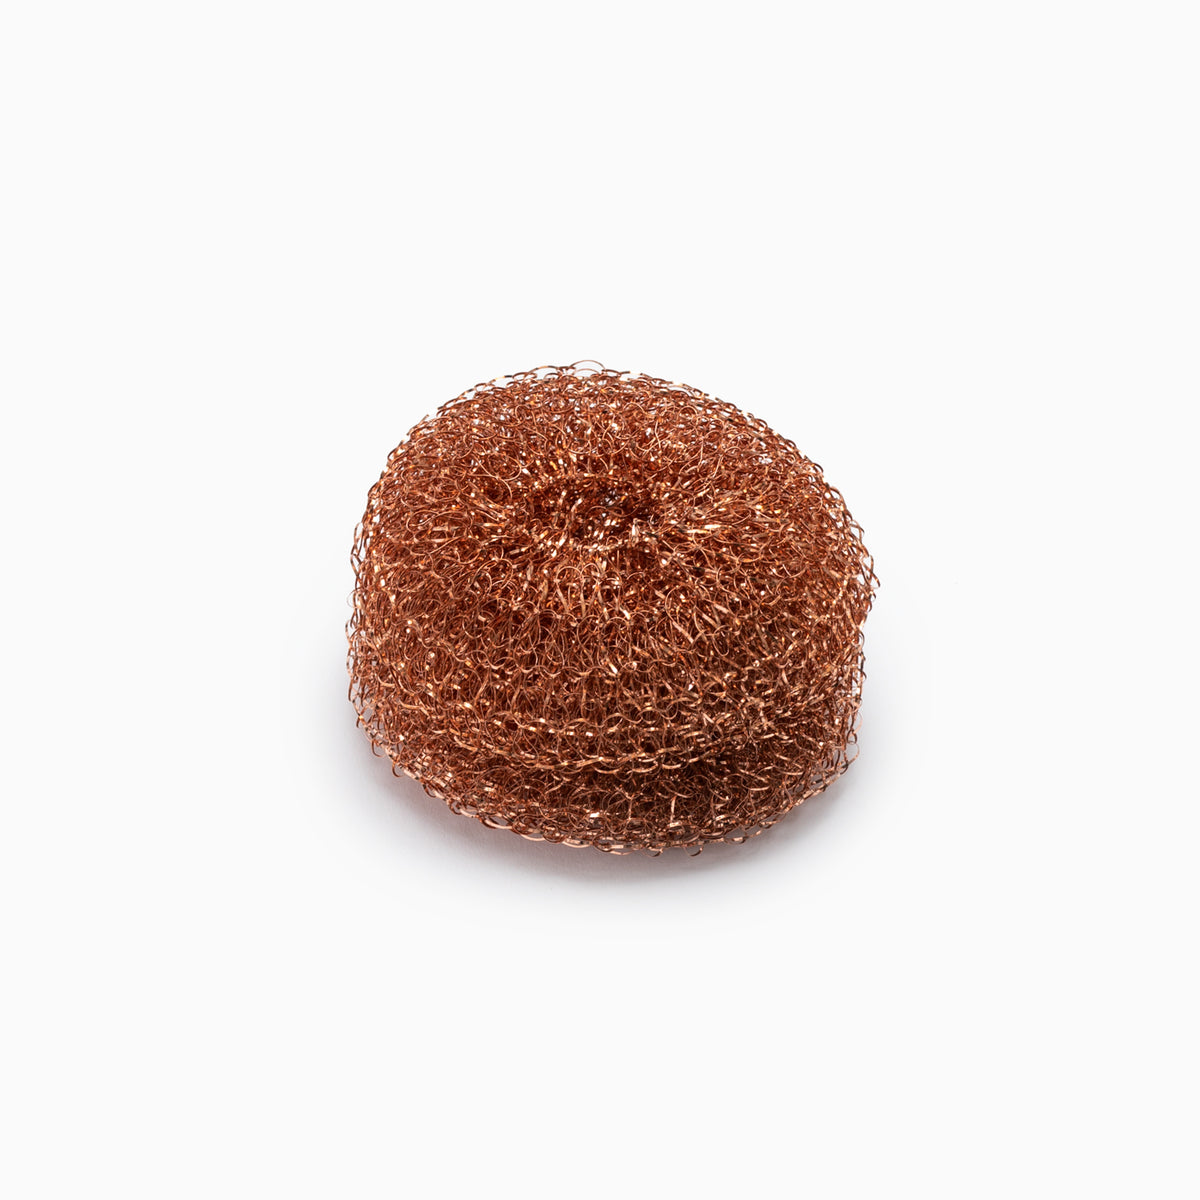 Copper Pot Scrubber / Set of Two – DIG + CO.